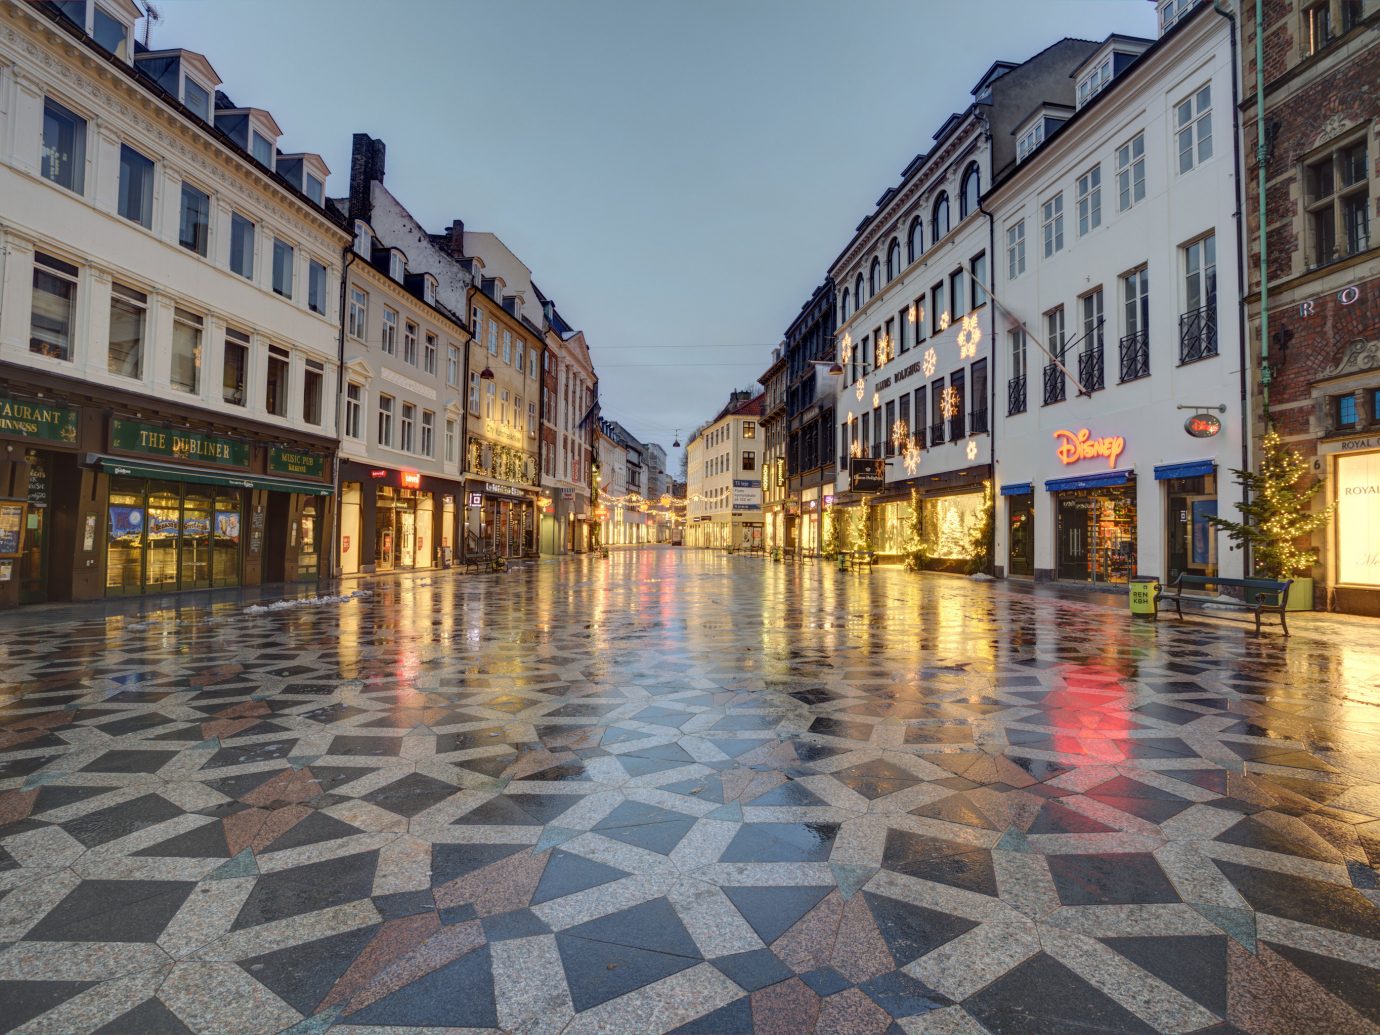 Copenhagen Denmark Trip Ideas Town reflection water City town square street sky evening building tourist attraction road surface Downtown facade plaza pedestrian mixed use cobblestone road